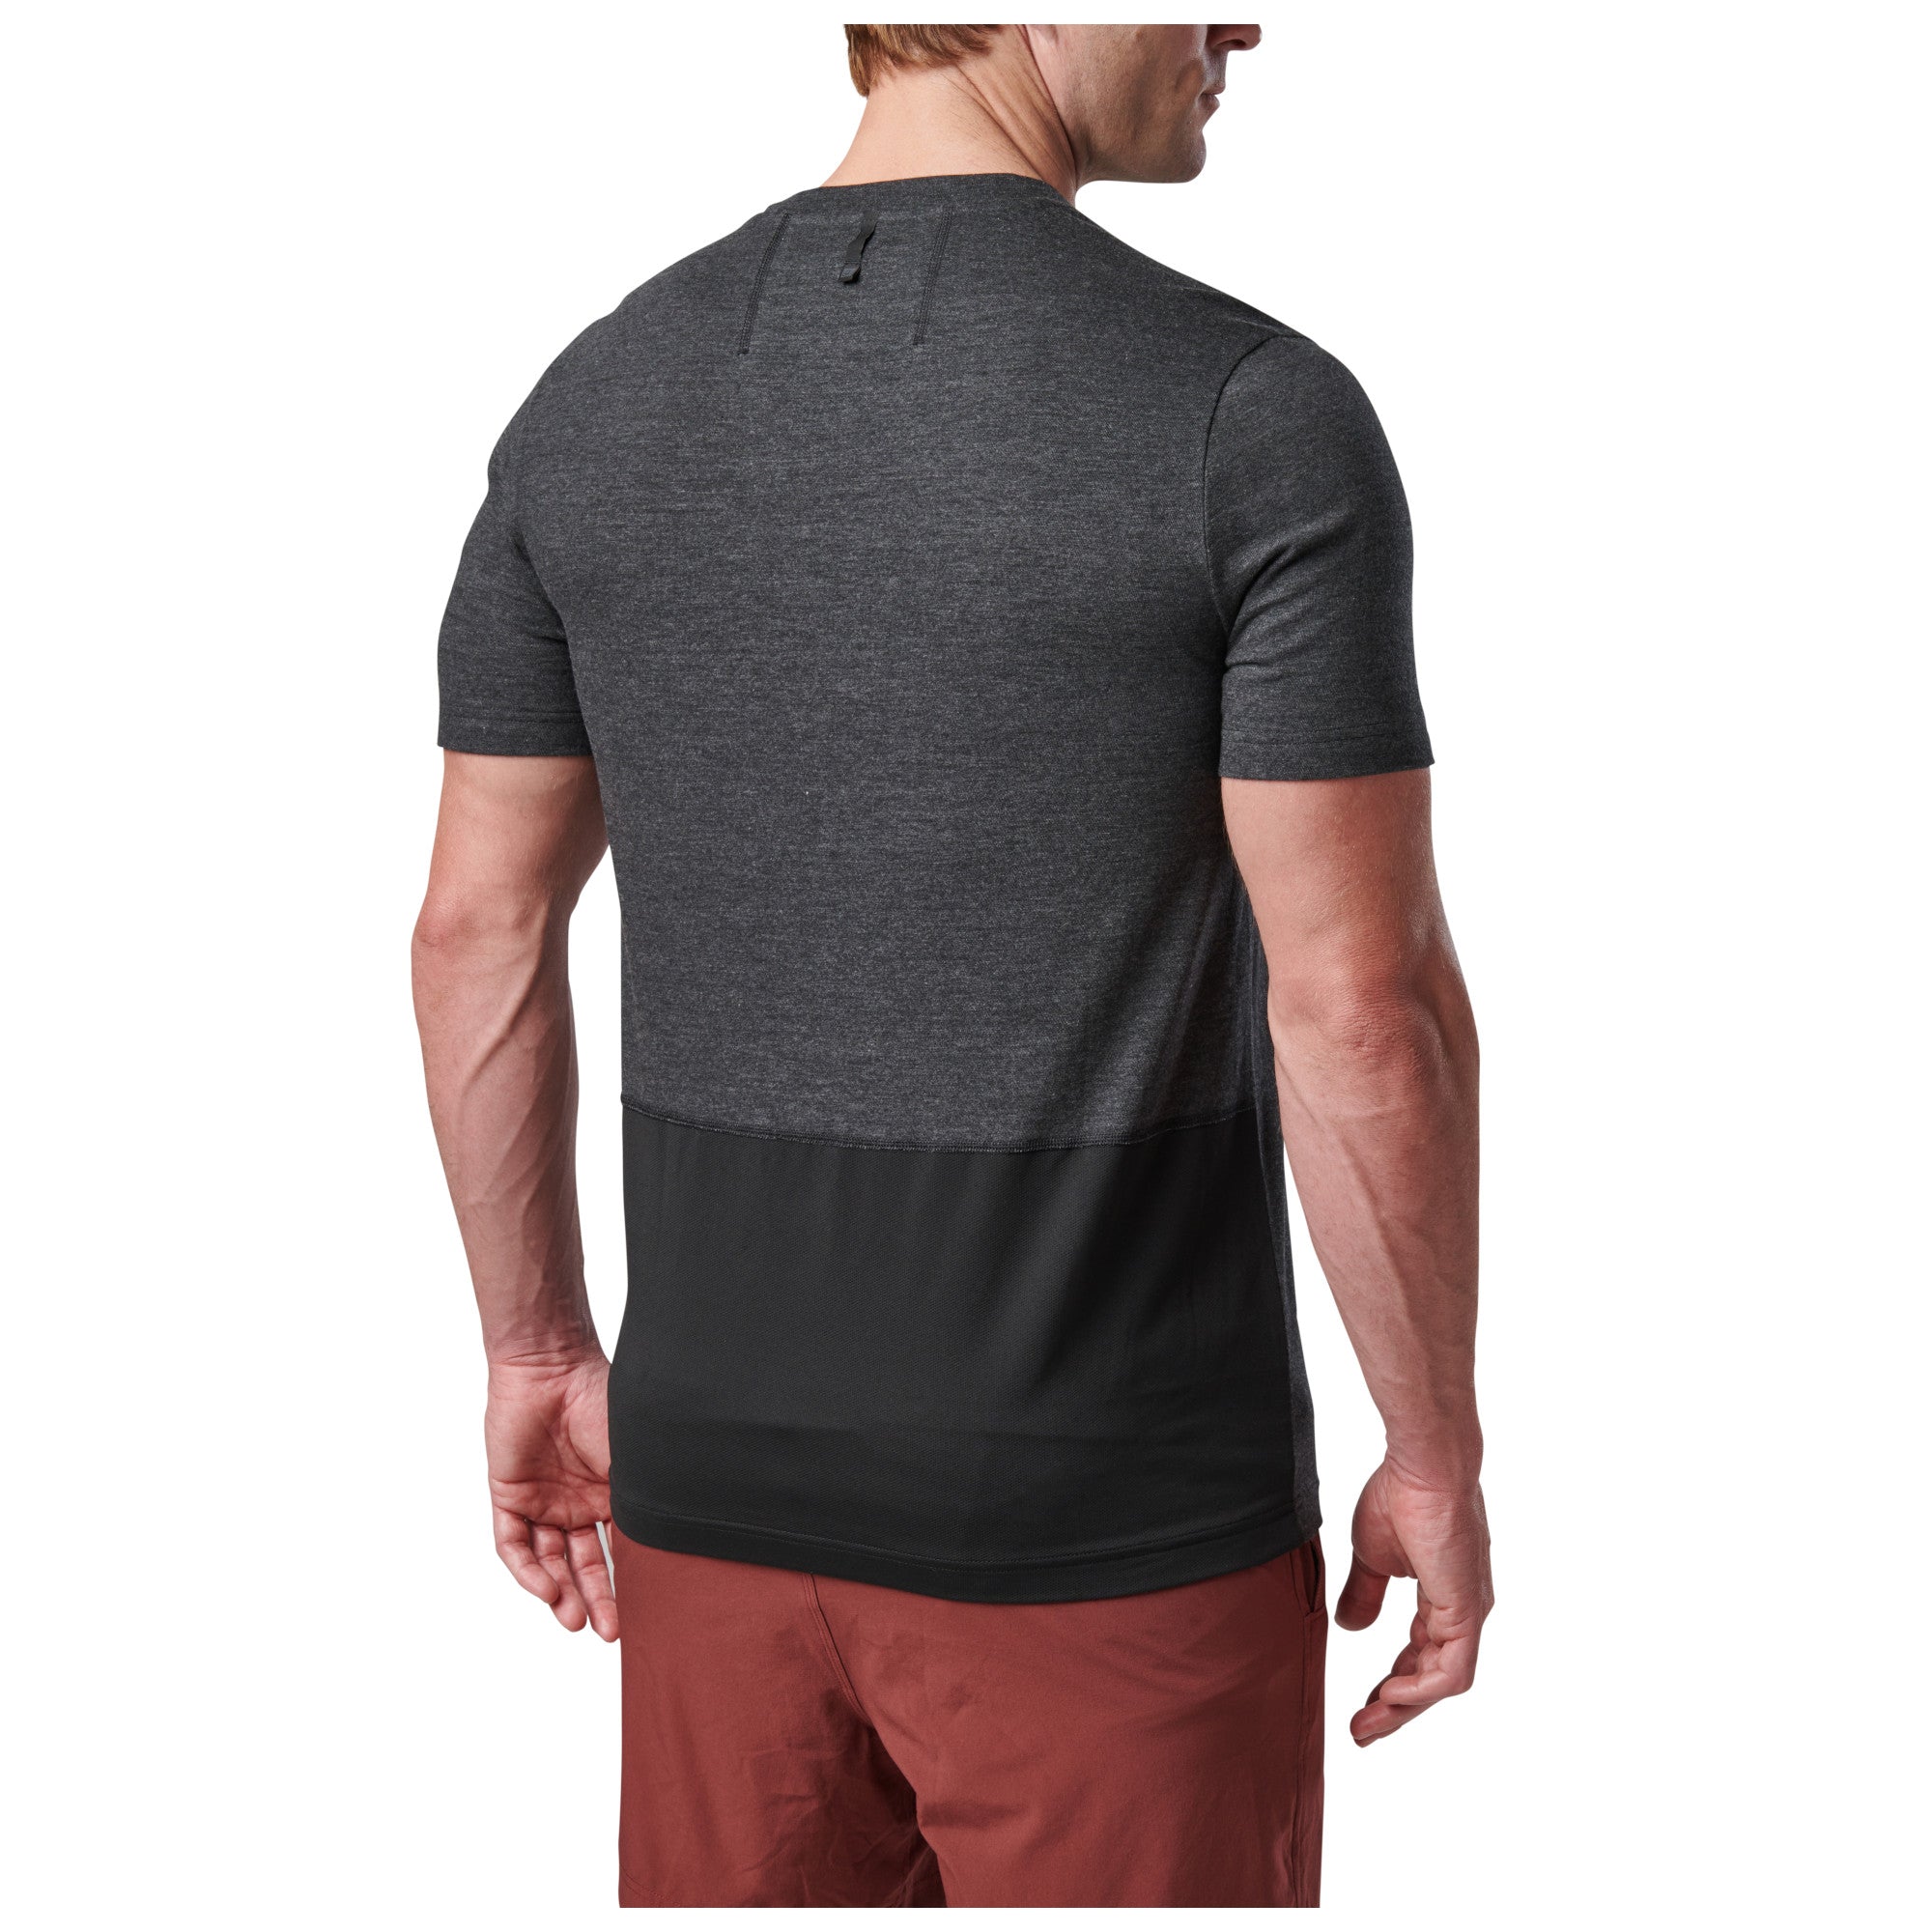 5.11 Tactical PT-R Charge Short Sleeve Top 2.0 Tees & Tanks 5.11 Tactical Black Heather Small Tactical Gear Supplier Tactical Distributors Australia